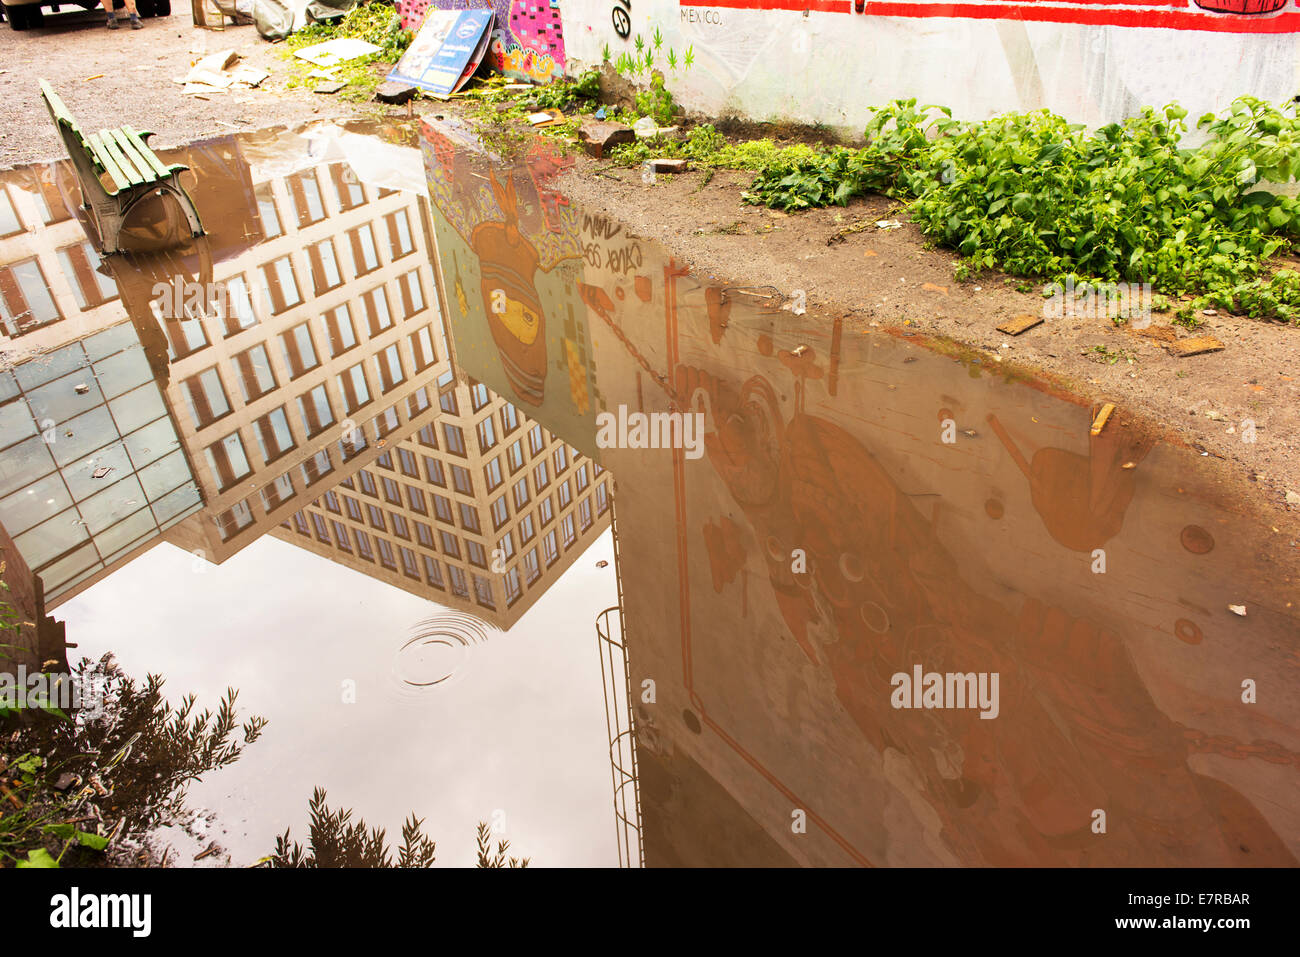 Gangeviertel, a collection of alleys of alternative lifestylers and art. Stock Photo